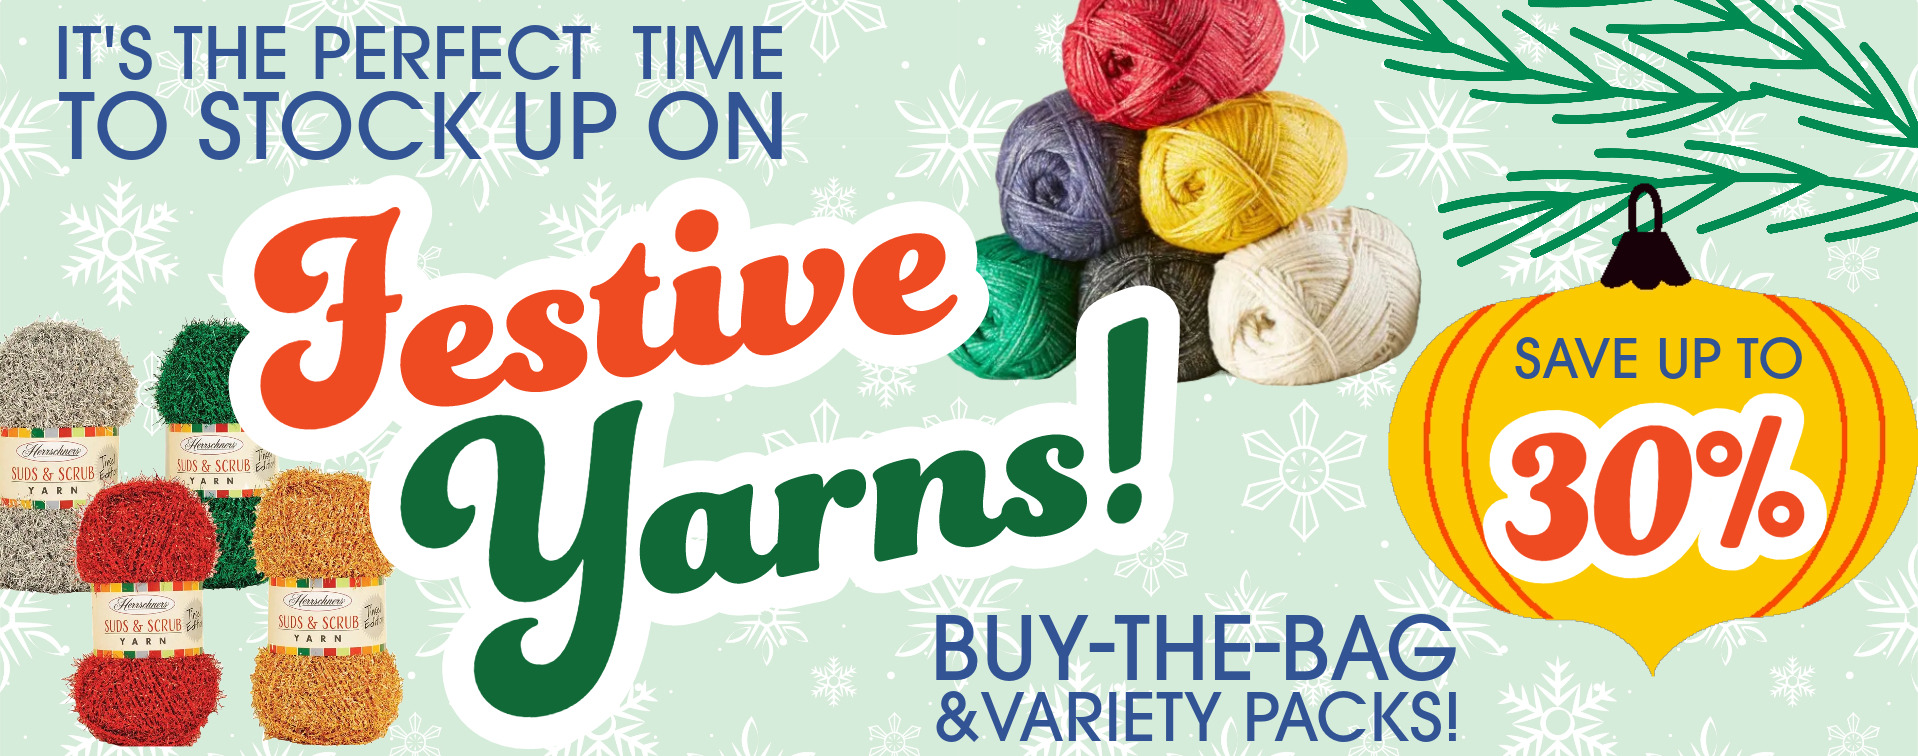 Festive Yarns - Save up to 30%.